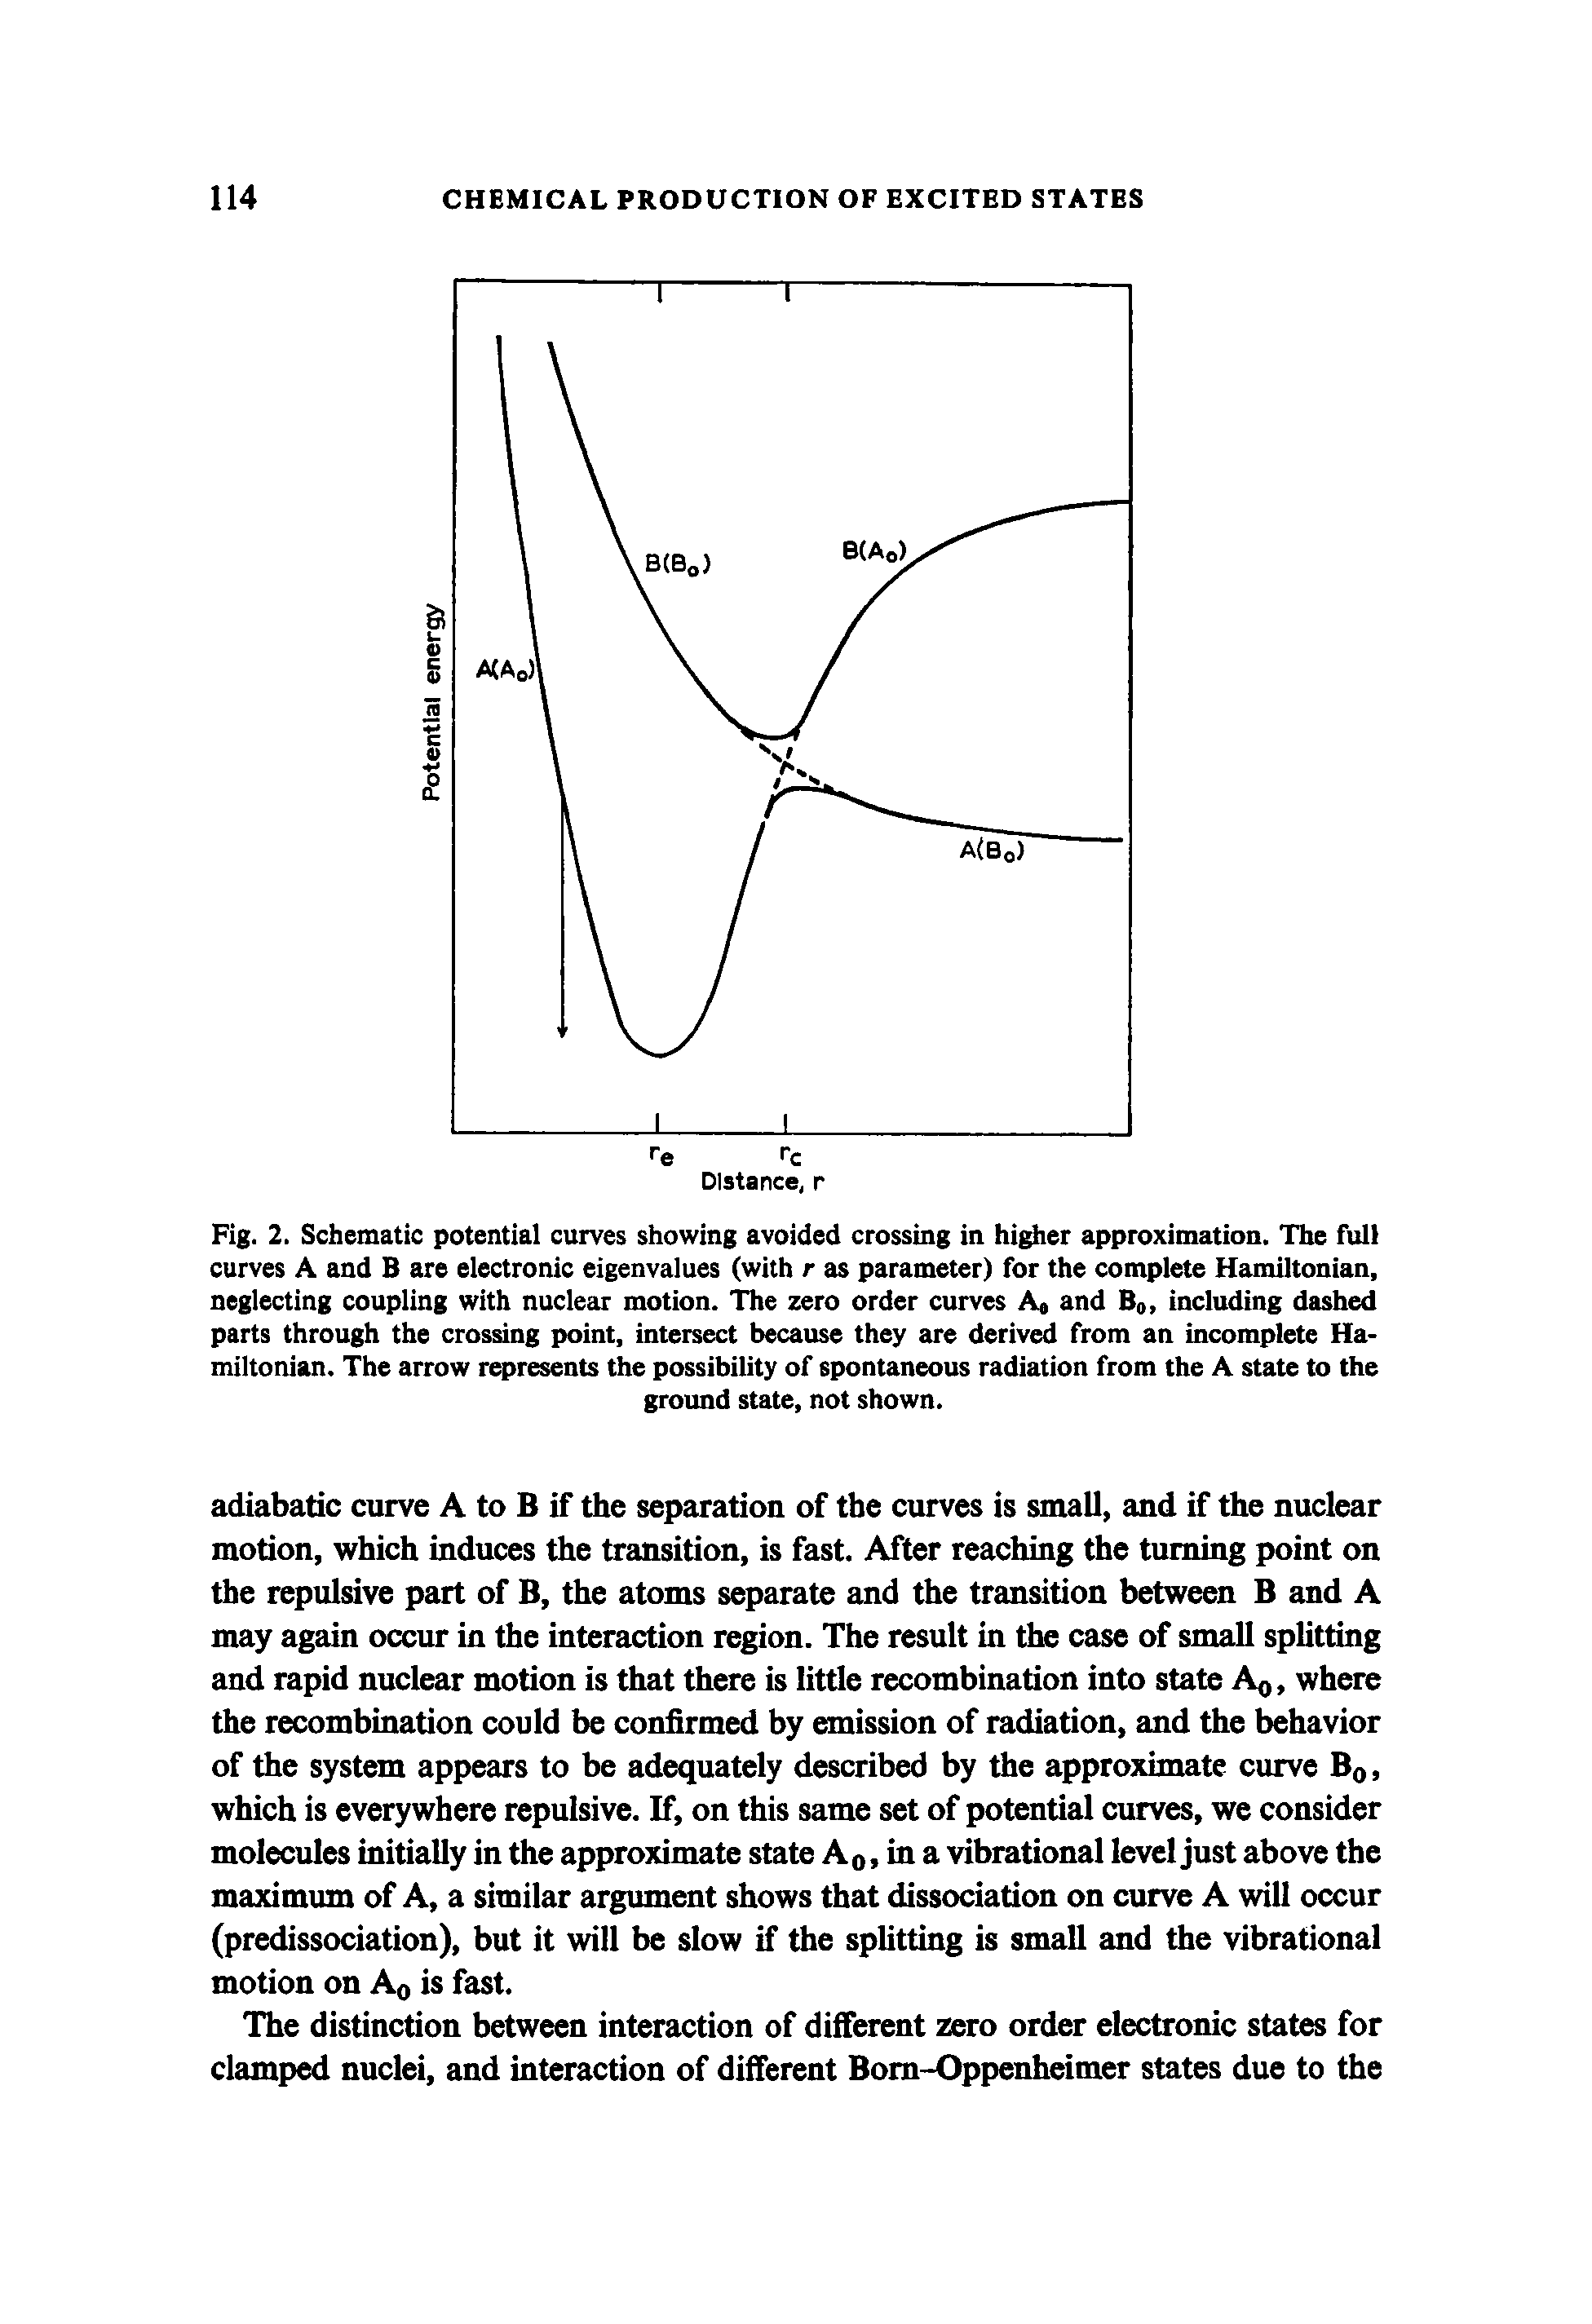 Fig. 2. Schematic potential curves showing avoided crossing in higher approximation. The full curves A and B are electronic eigenvalues (with r as parameter) for the complete Hamiltonian, neglecting coupling with nuclear motion. The zero order curves A and B0, including dashed parts through the crossing point, intersect because they are derived from an incomplete Hamiltonian. The arrow represents the possibility of spontaneous radiation from the A state to the...